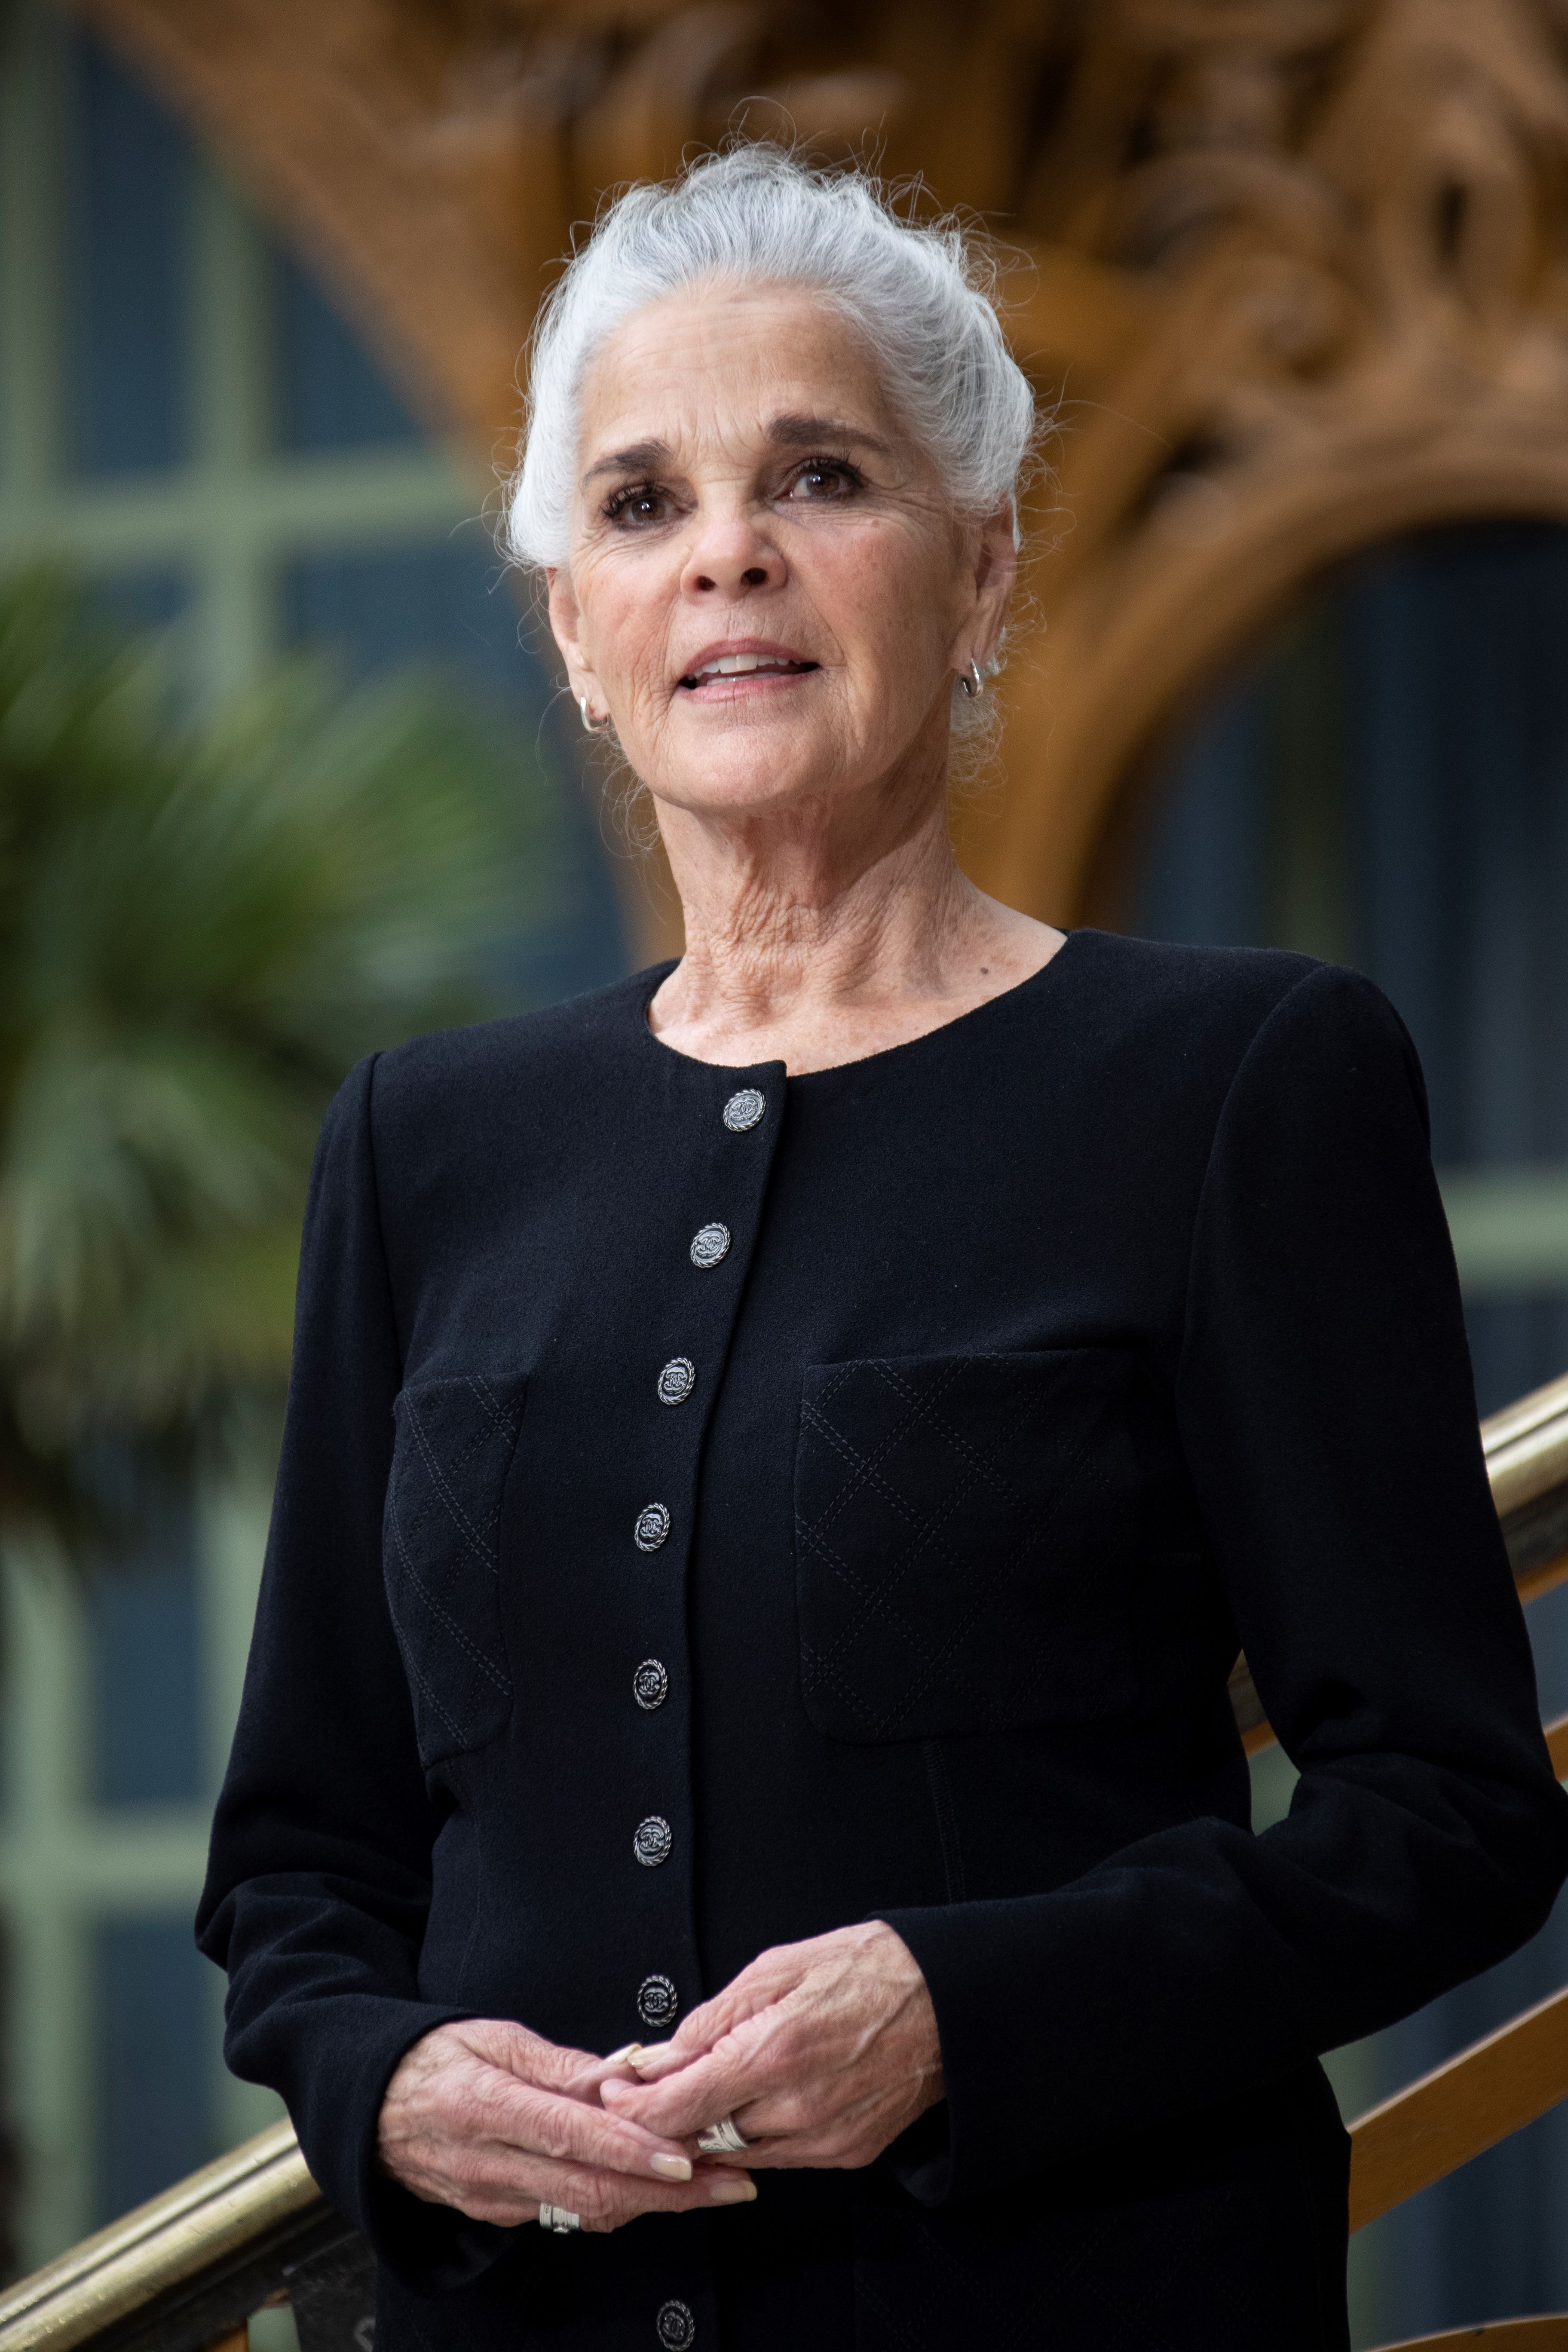 Ali MacGraw at 2020 Chanel Croisiere (Cruise) fashion show at the Grand Palais in Paris | Source: Getty Images